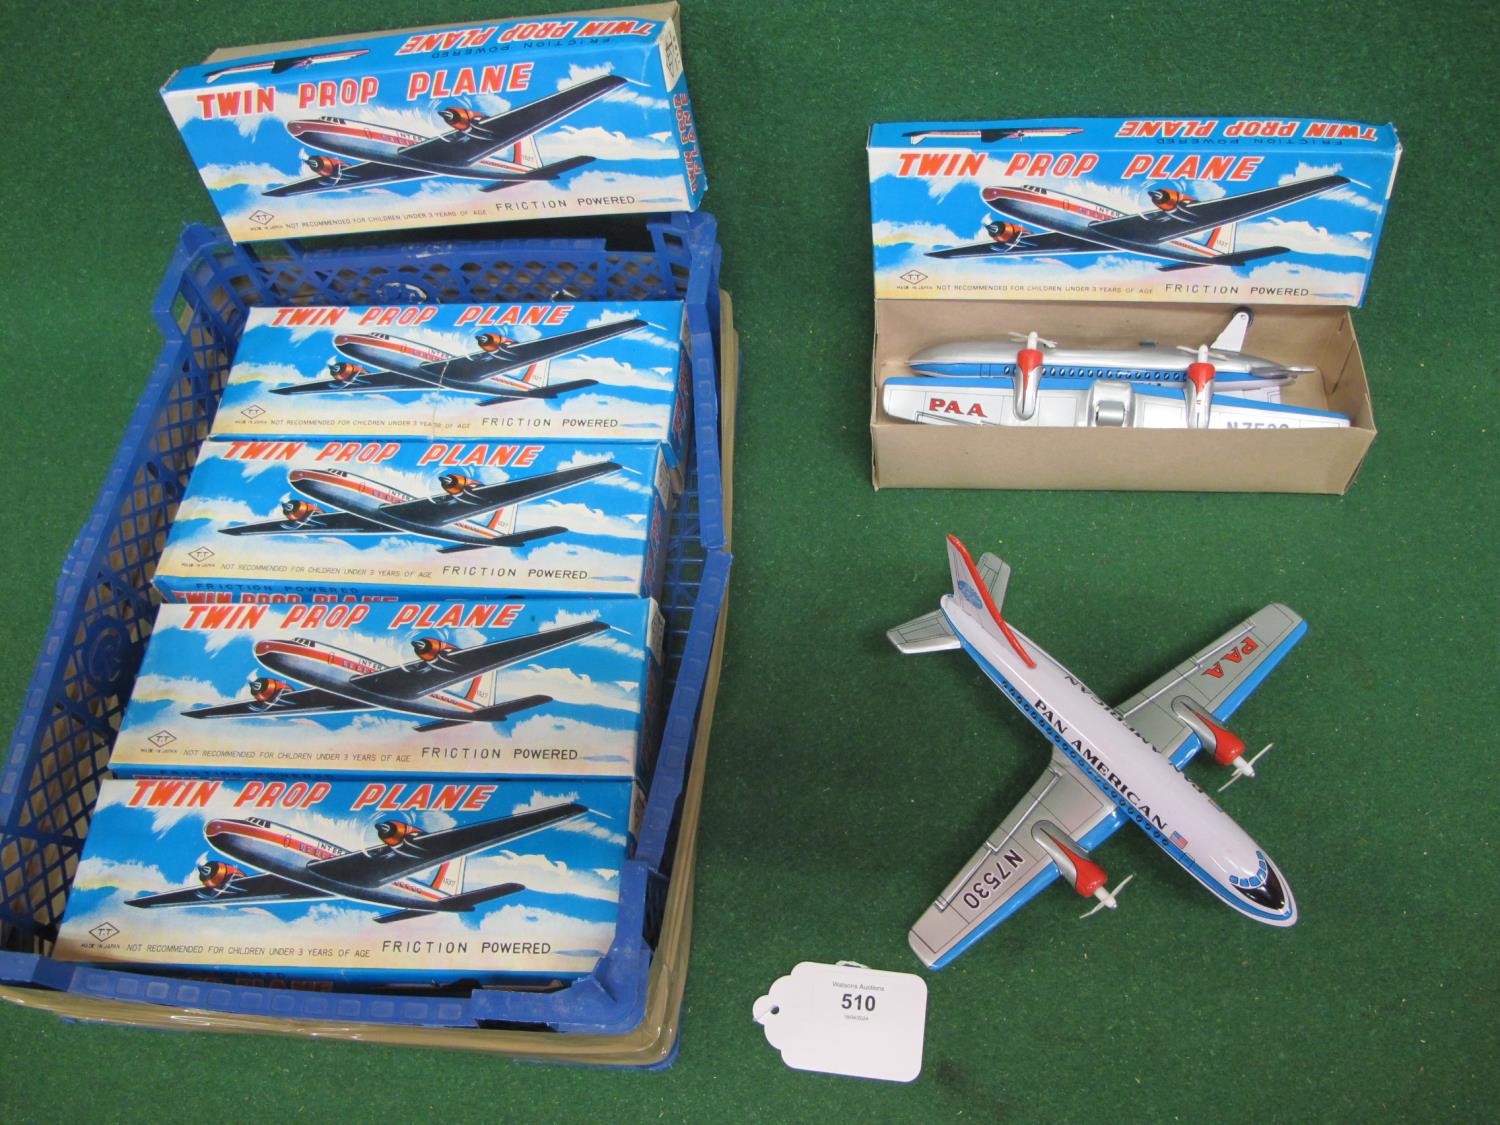 Six boxed Takatoku (TT-Japan) Pam Am twin prop airliners, circa 1970's, each is in two pieces and